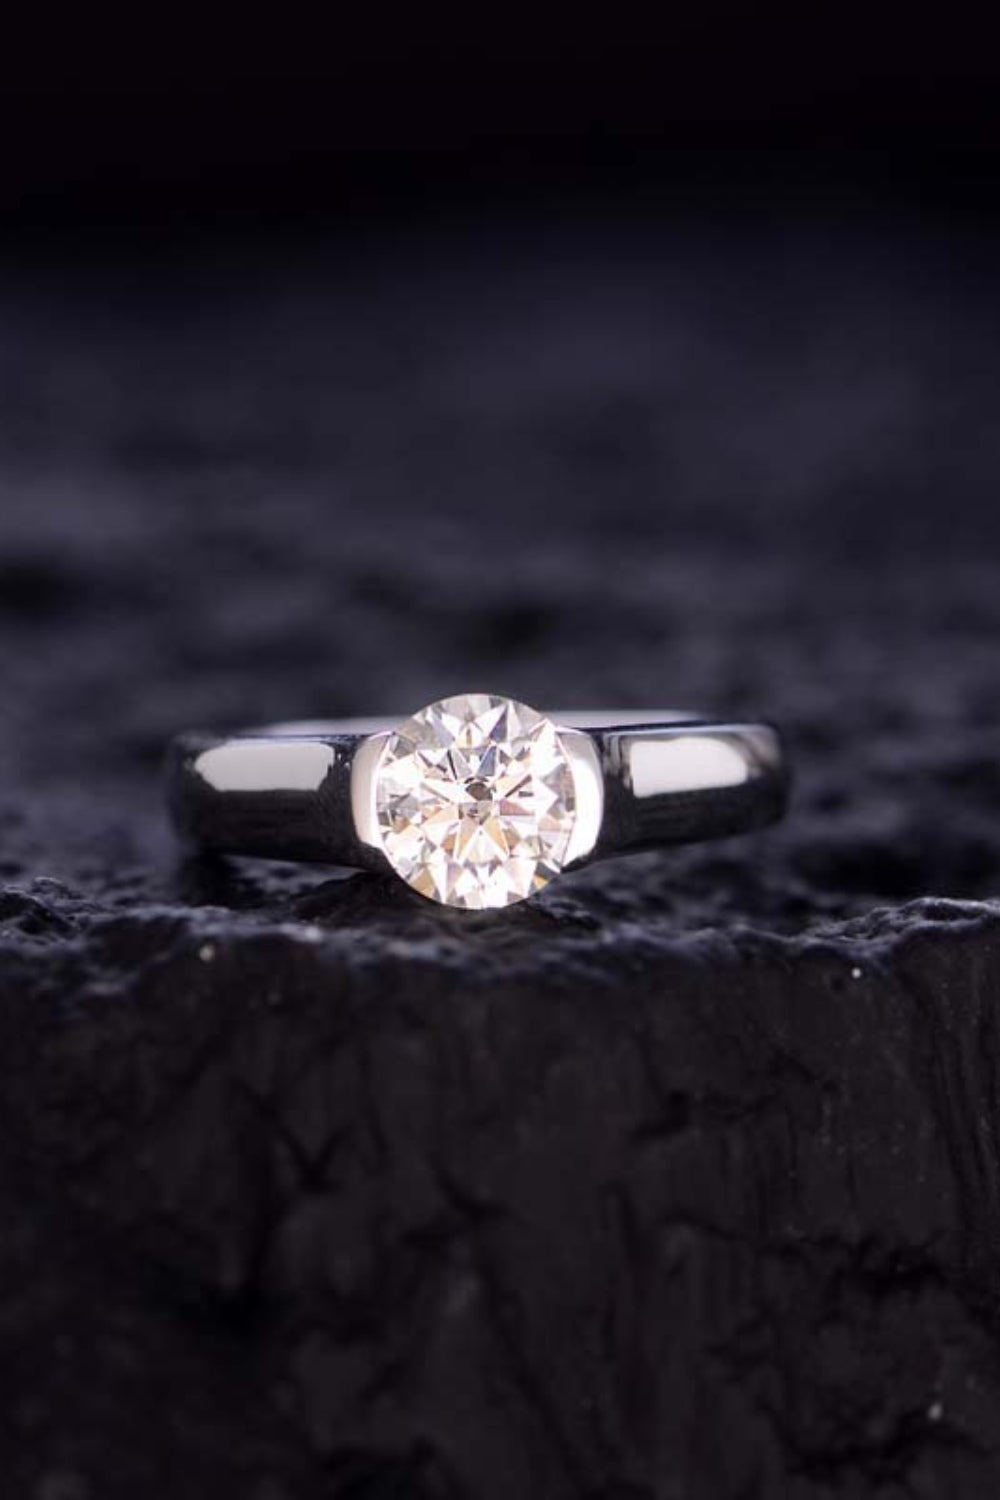 A close-up of a 1.5 Carat Moissanite 925 Sterling Silver Ring by Marianela's Exclusive Shop, LLC with a round-cut gem set on a sleek, gleaming 925 sterling silver band, placed on a textured dark background. The moissanite sparkles brightly, drawing attention to its clarity and brilliance.